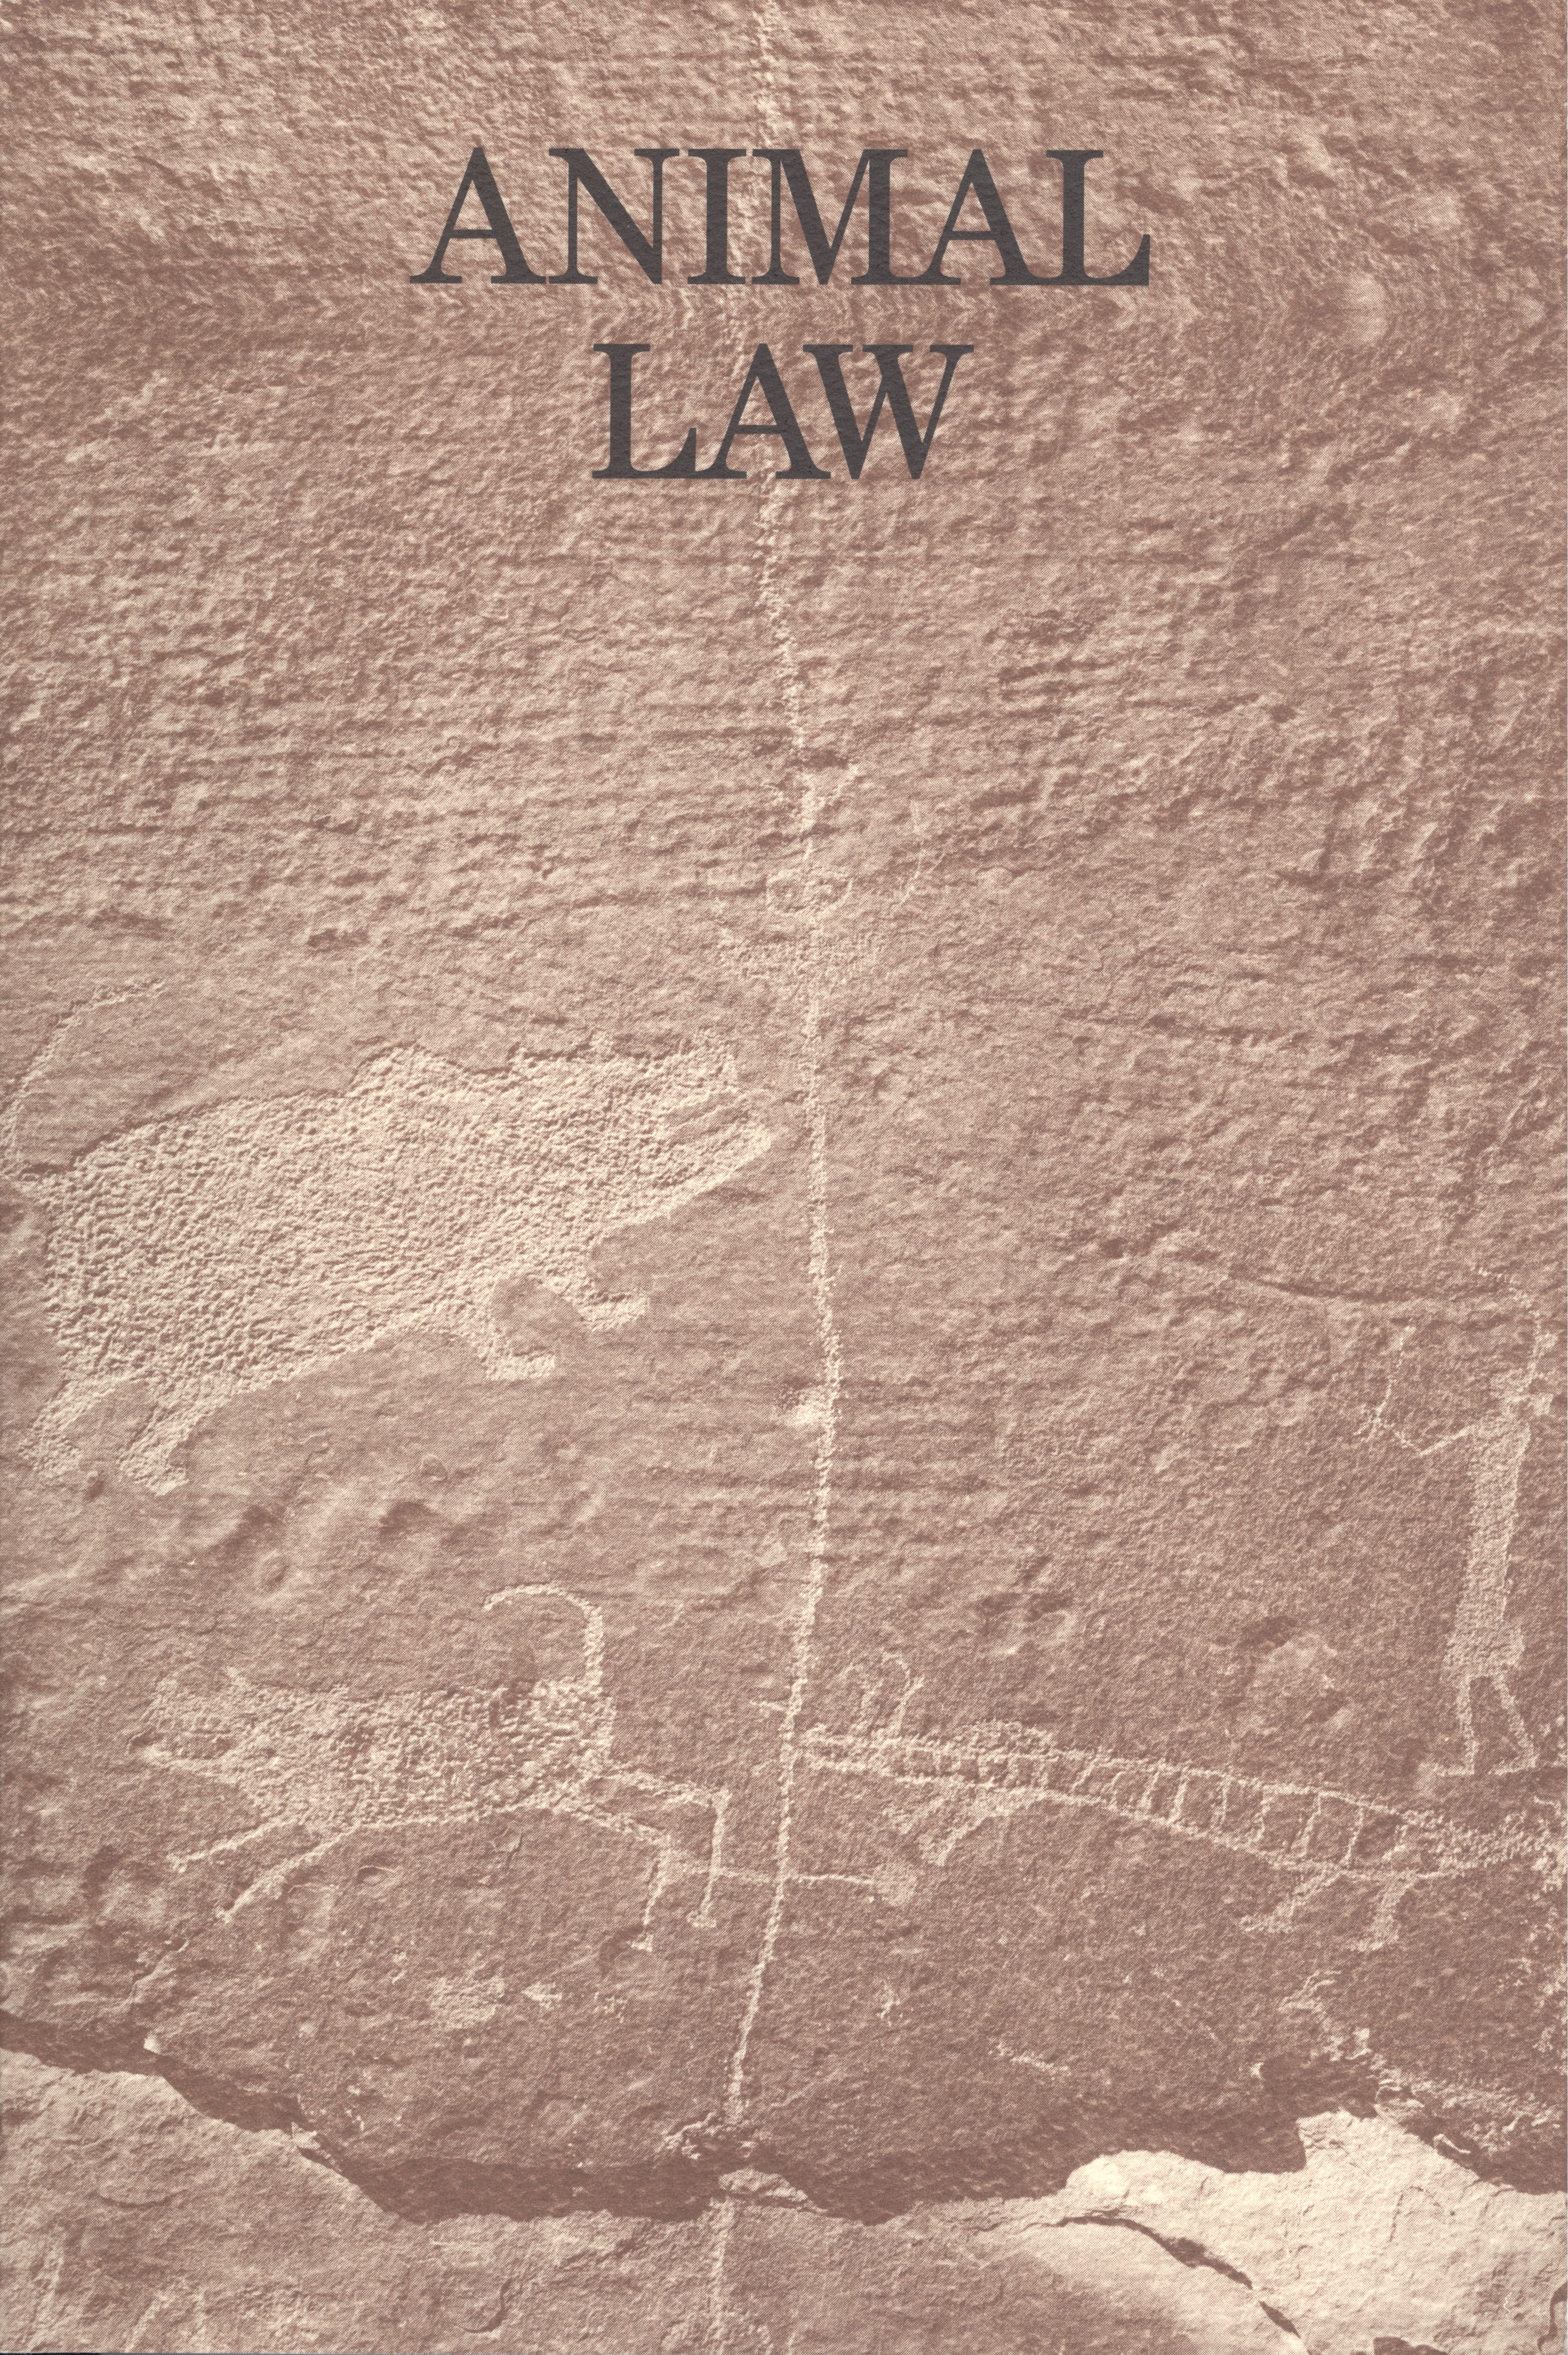 Cover of Animal Law Review Volume 7, Issue 1, 2001